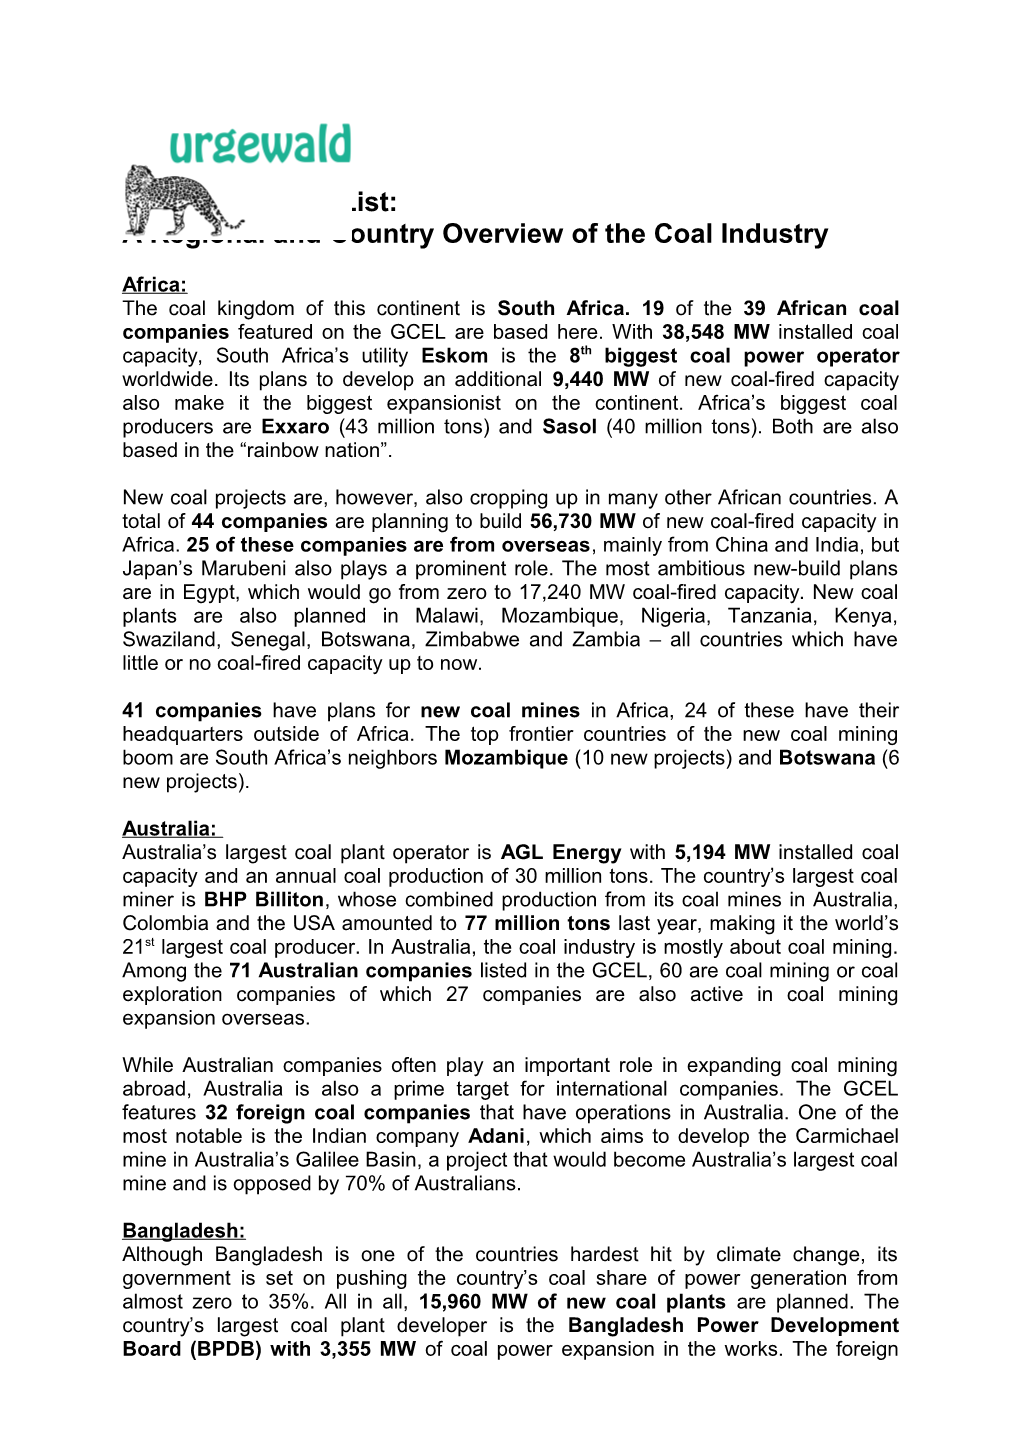 Global Coal Exit List: a Regional and Country Overview of the Coal Industry